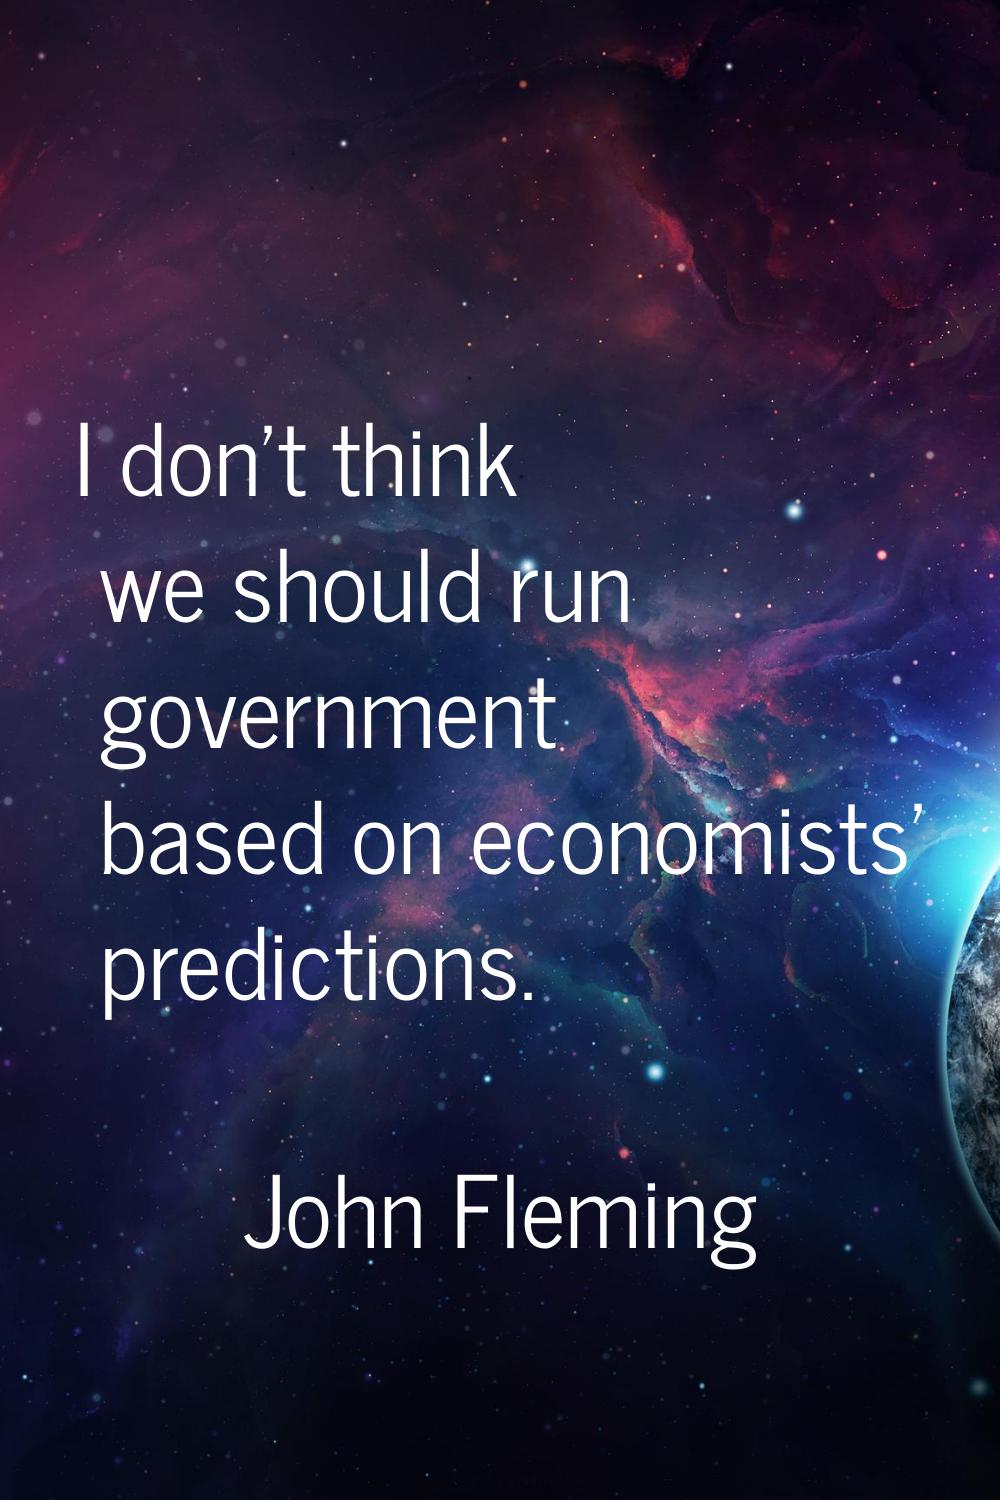 I don't think we should run government based on economists' predictions.